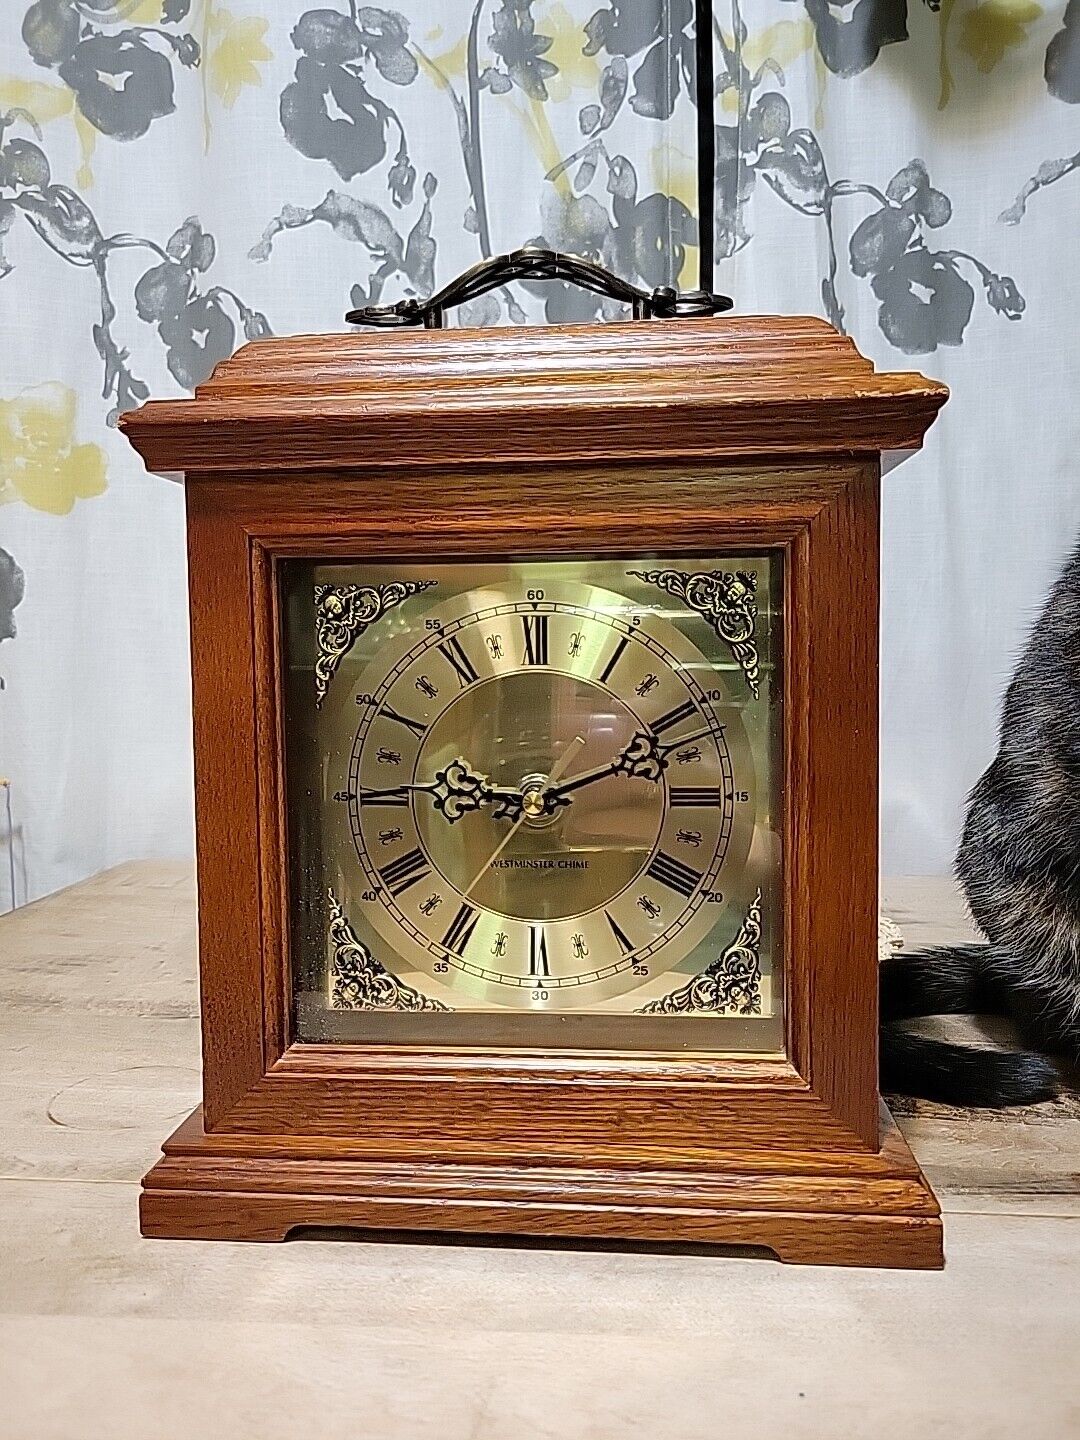 *Working* Westminster Chime Mantel Clock